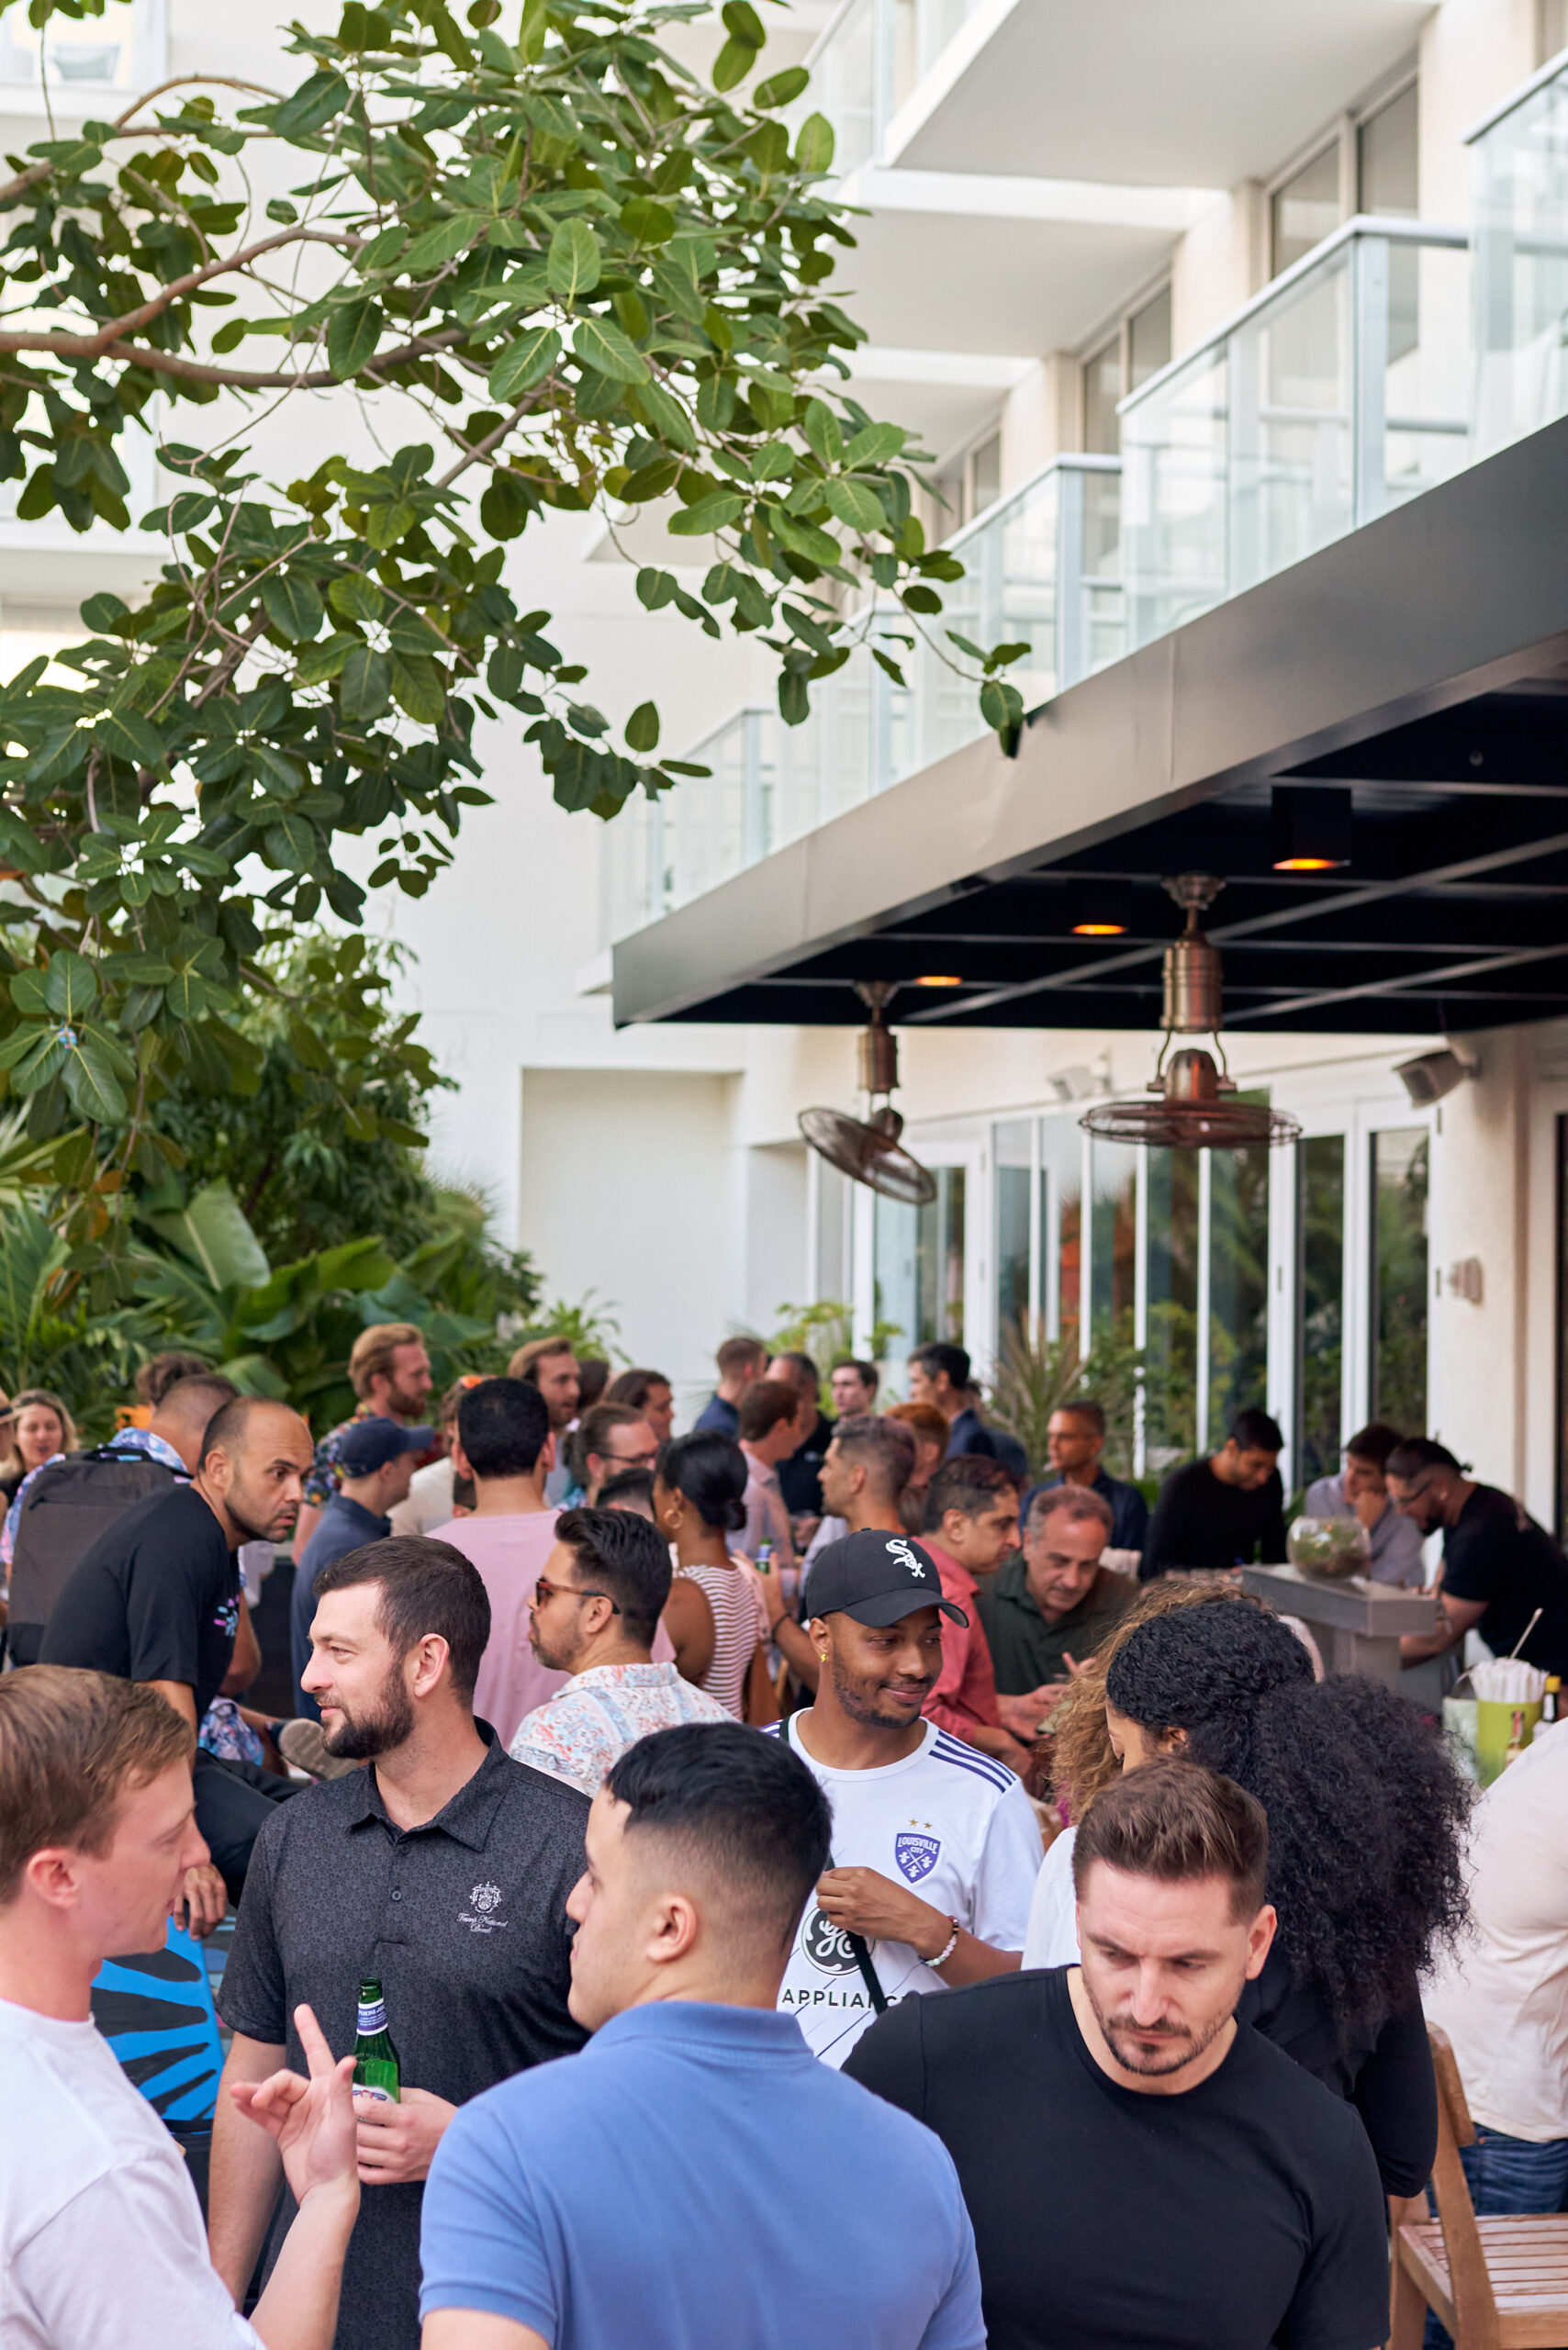 Visit the The #MiamiTech Happy Hour event page